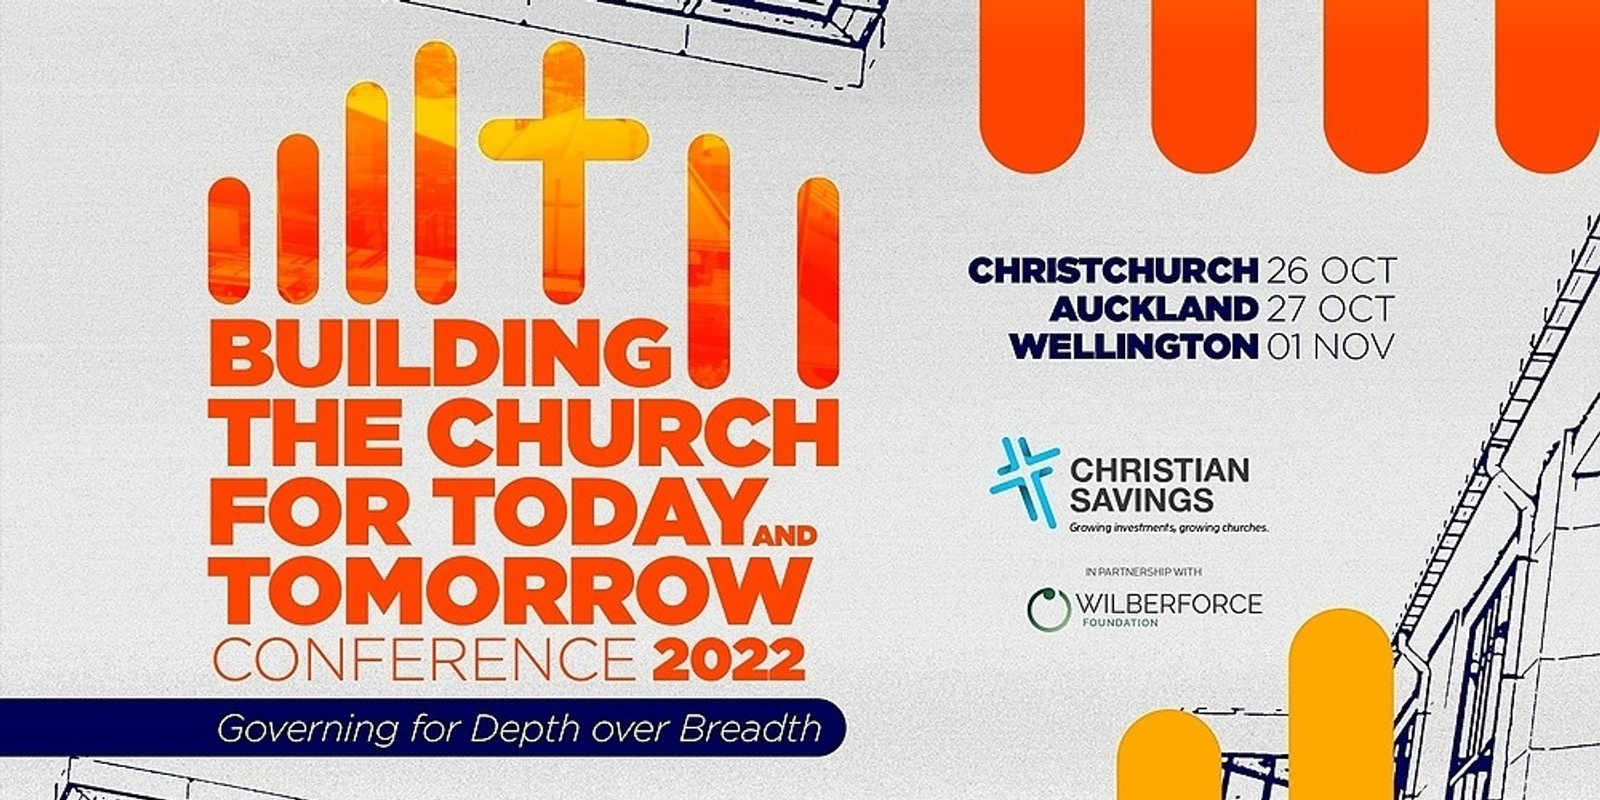 Banner image for CHRISTCHURCH - Building The Church For Today And Tomorrow Conference 2022 